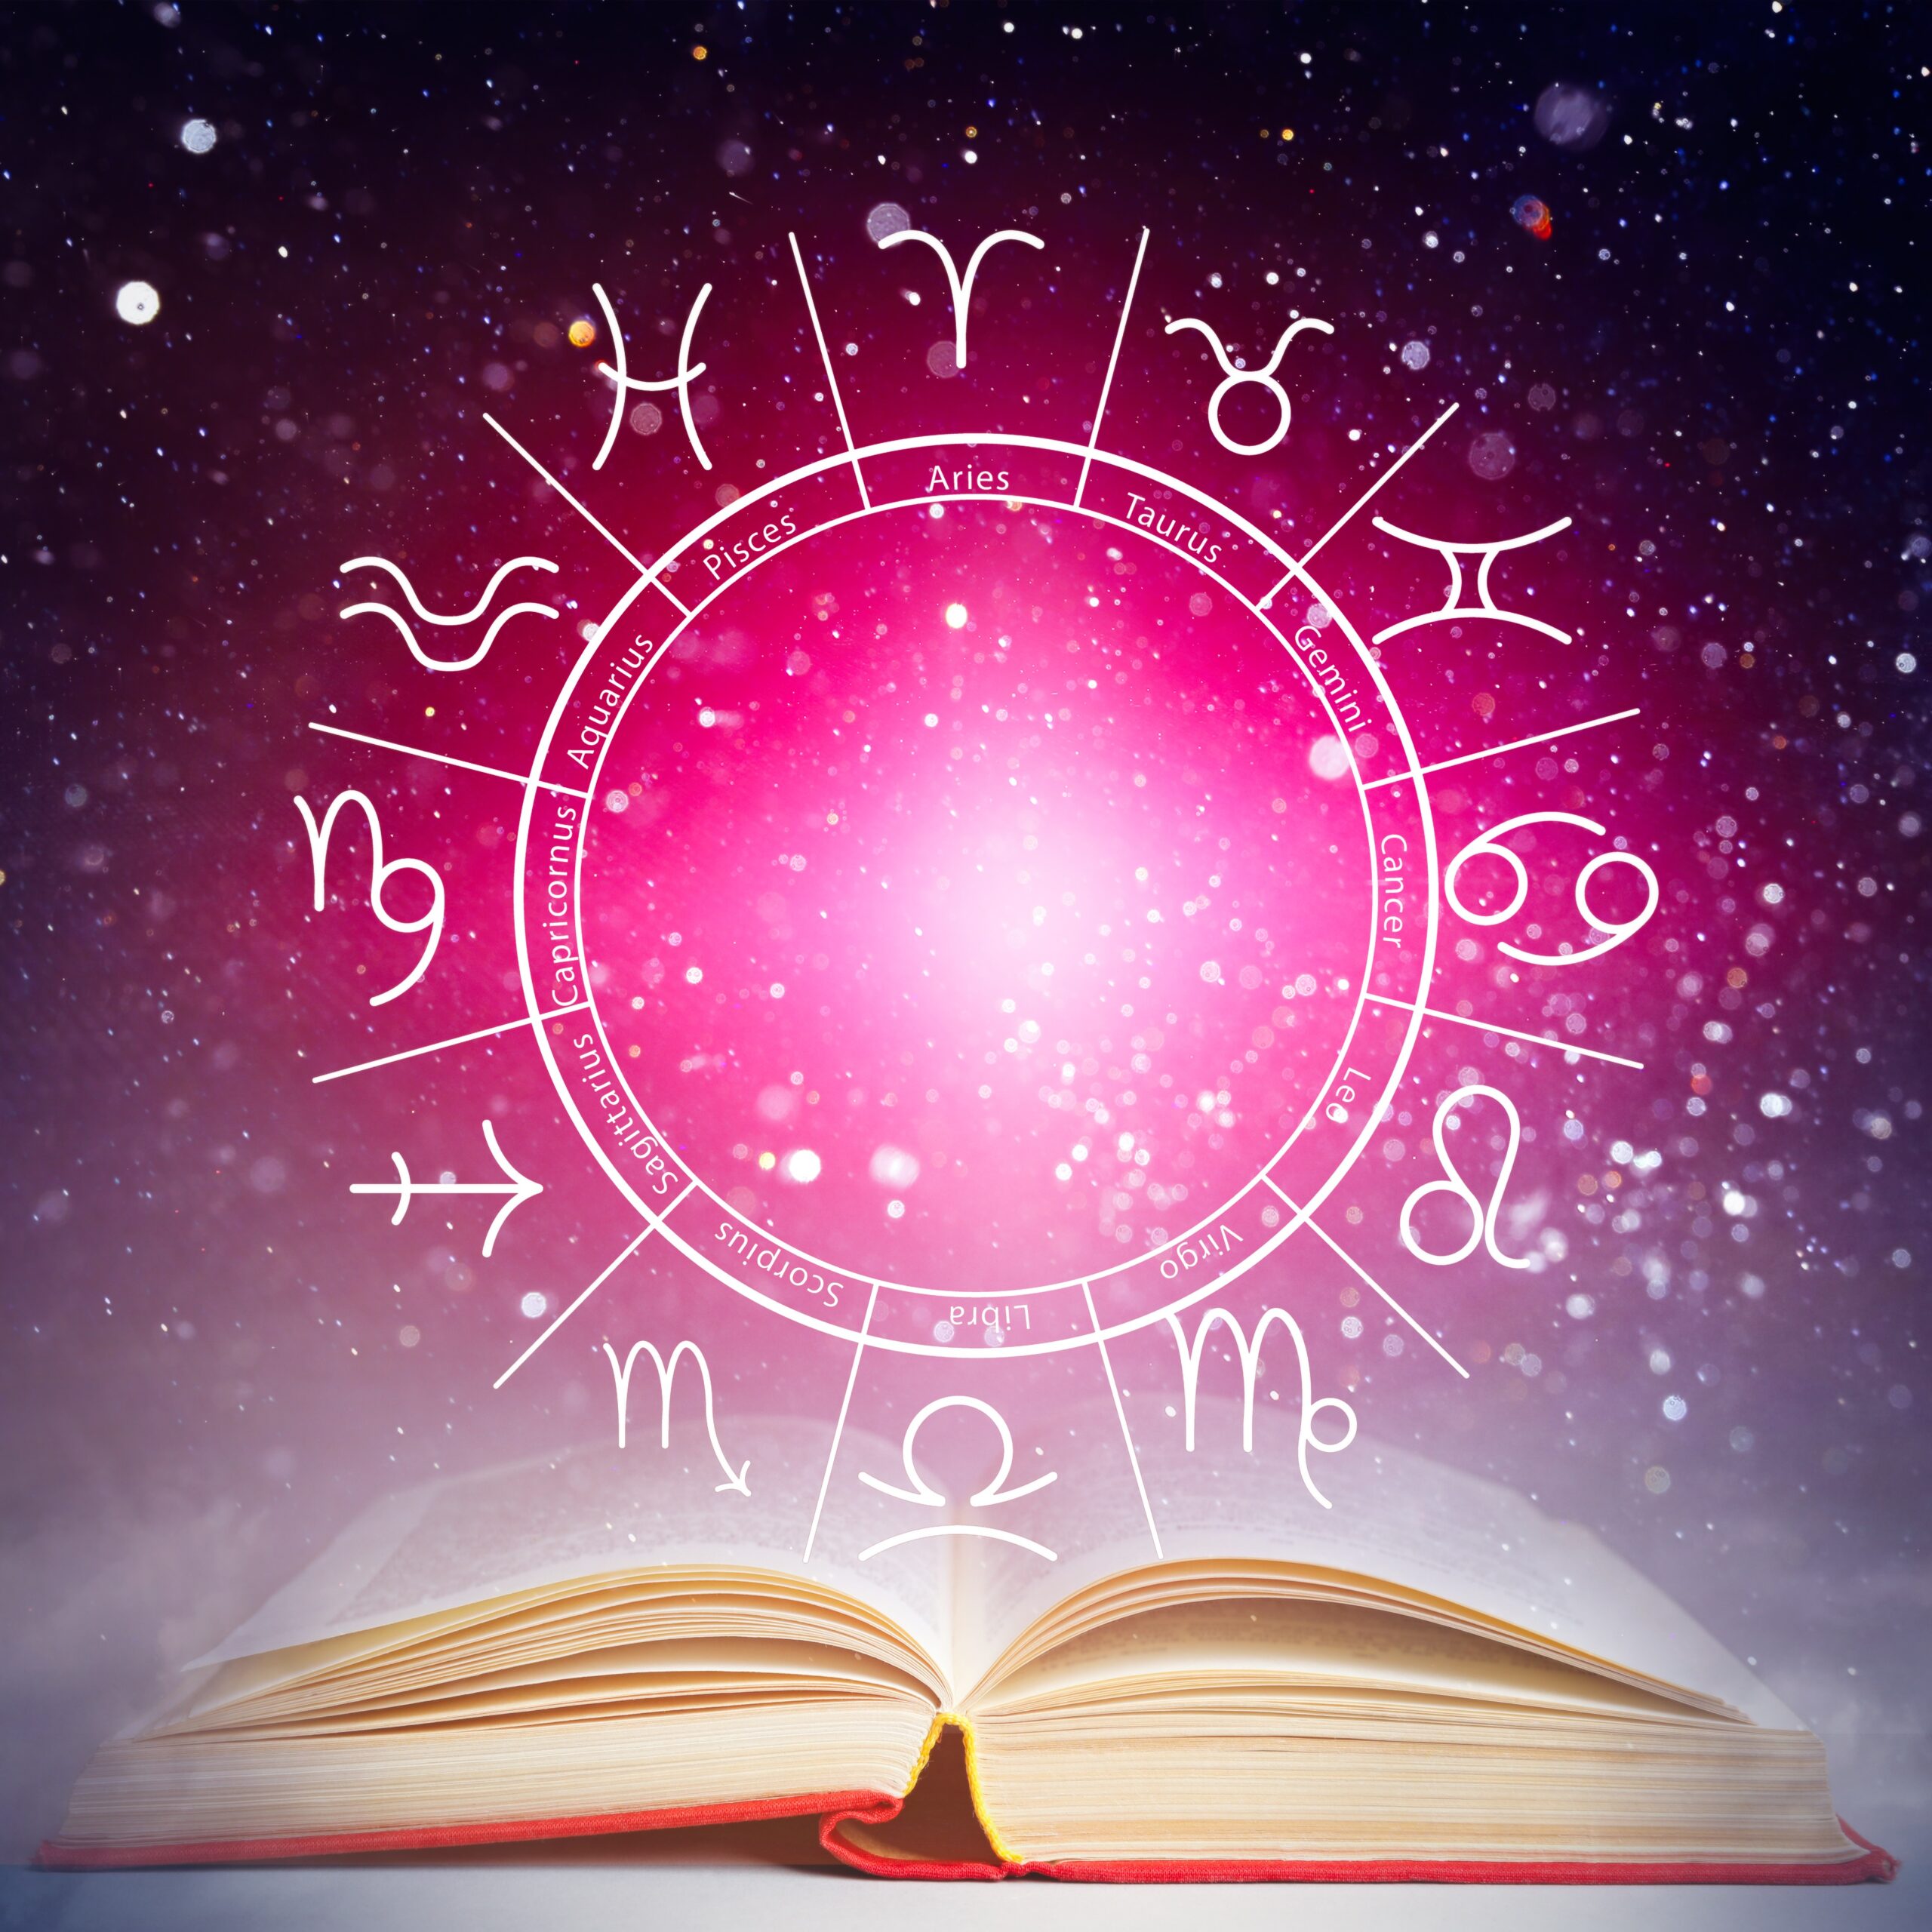 Open book with pink astrological wheel & signs floating above it against a starry night sky